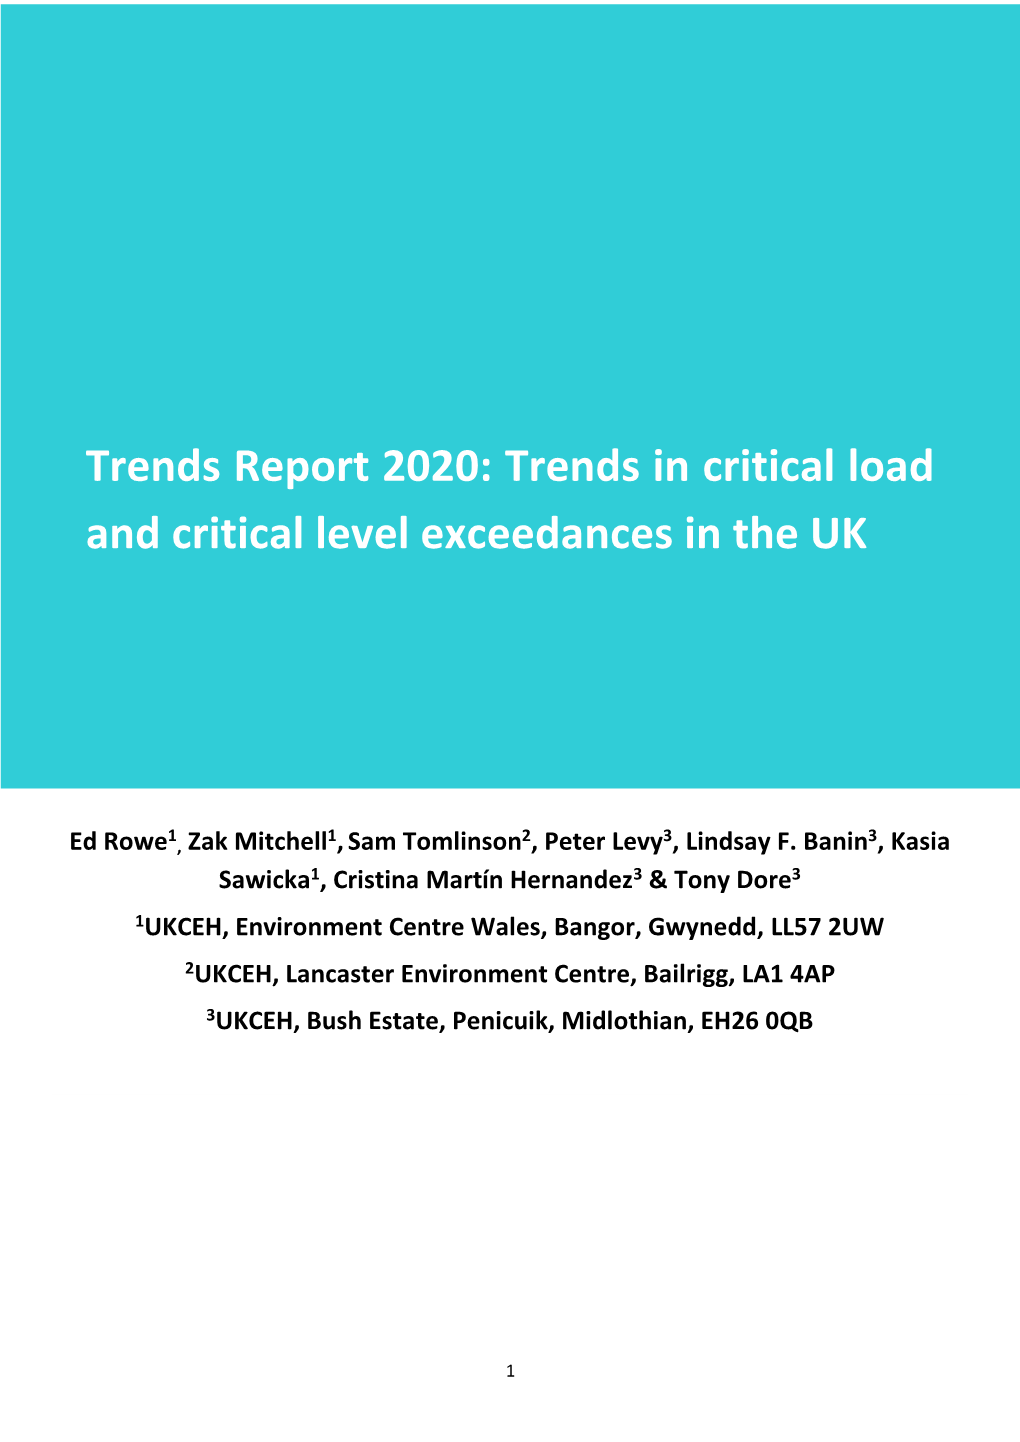 Trends Report 2020: Trends in Critical Load and Critical Level Exceedances in the UK